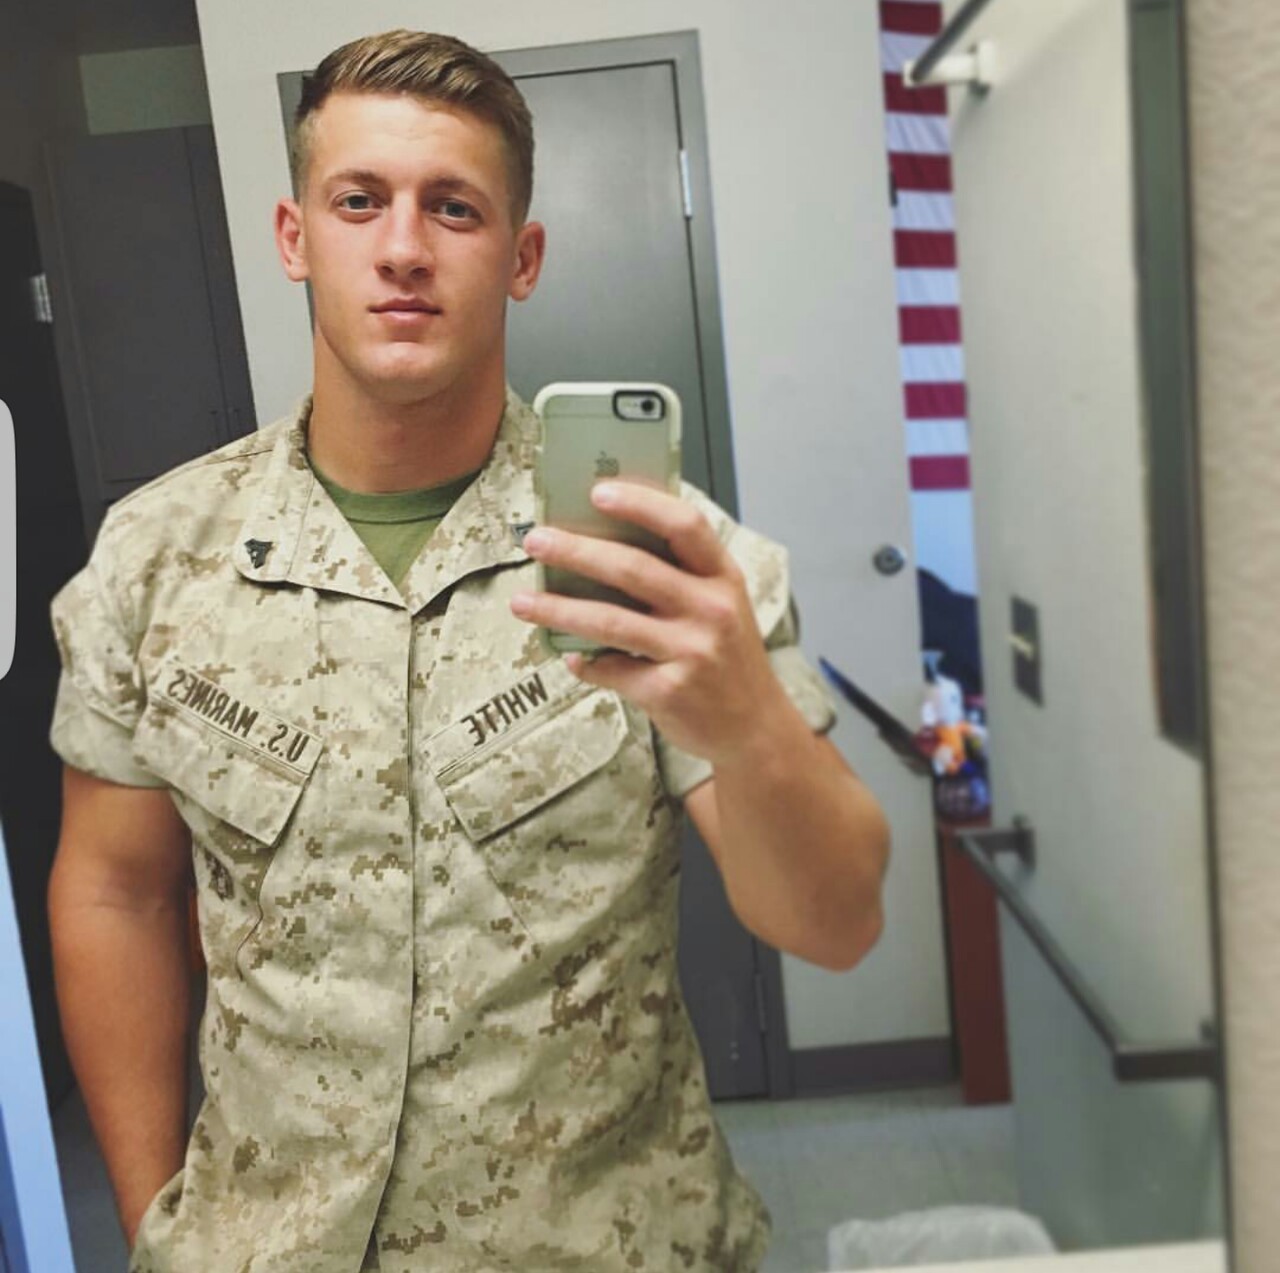 hot-soldier-guy-selfie-young-military-uniform-hunk